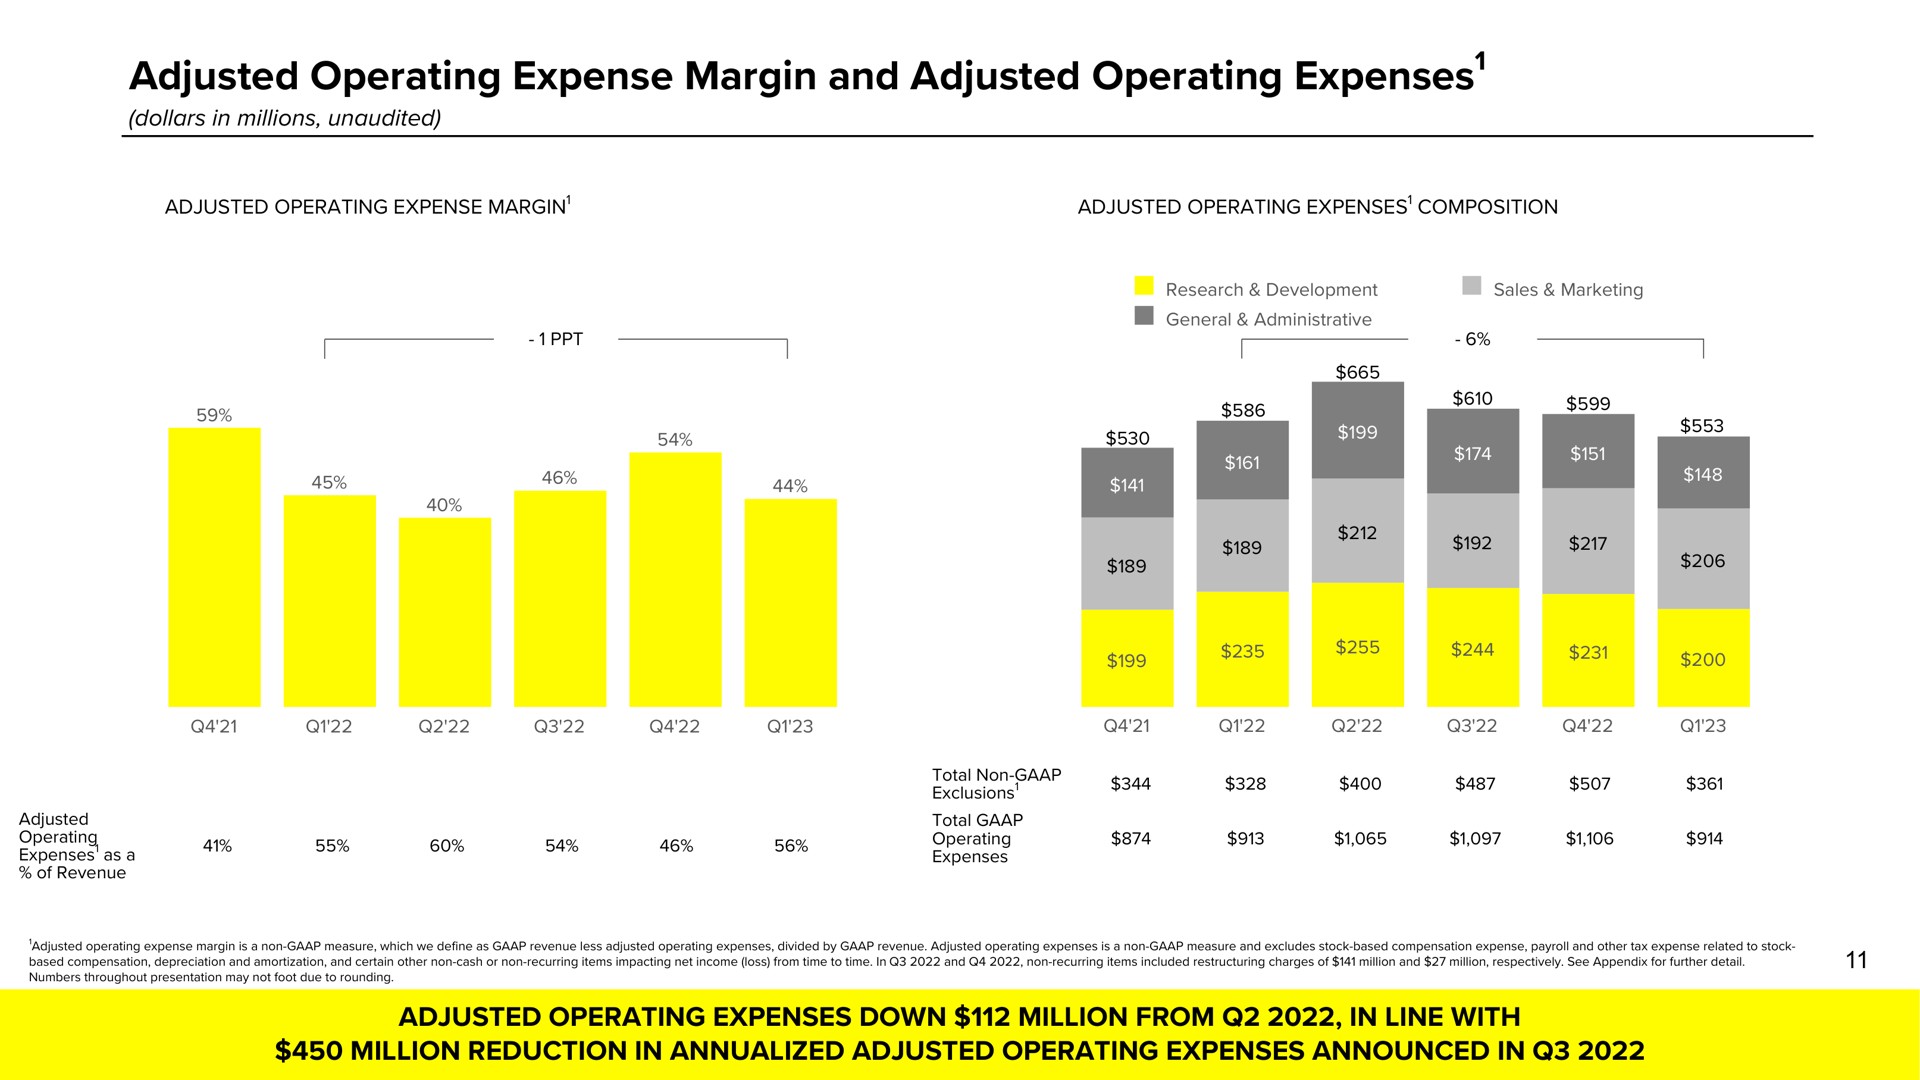 adjusted operating expense margin and adjusted operating expenses expenses a expenses down million from in line with million reduction in expenses announced in | Snap Inc